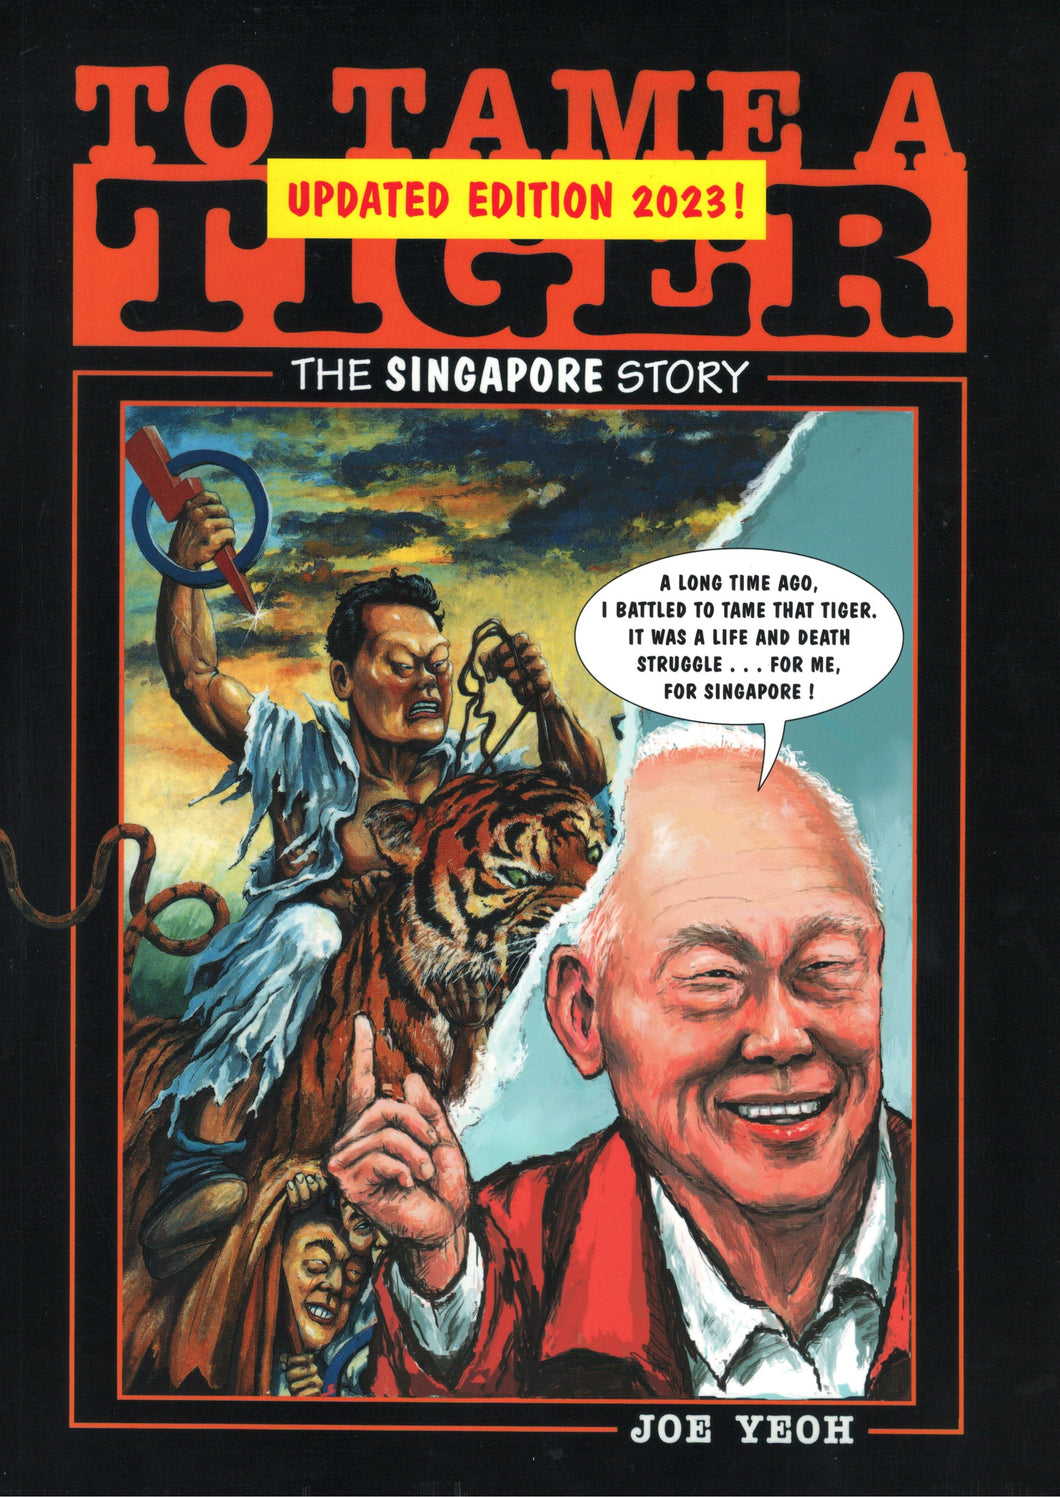 To Tame A Tiger - The Singapore Story